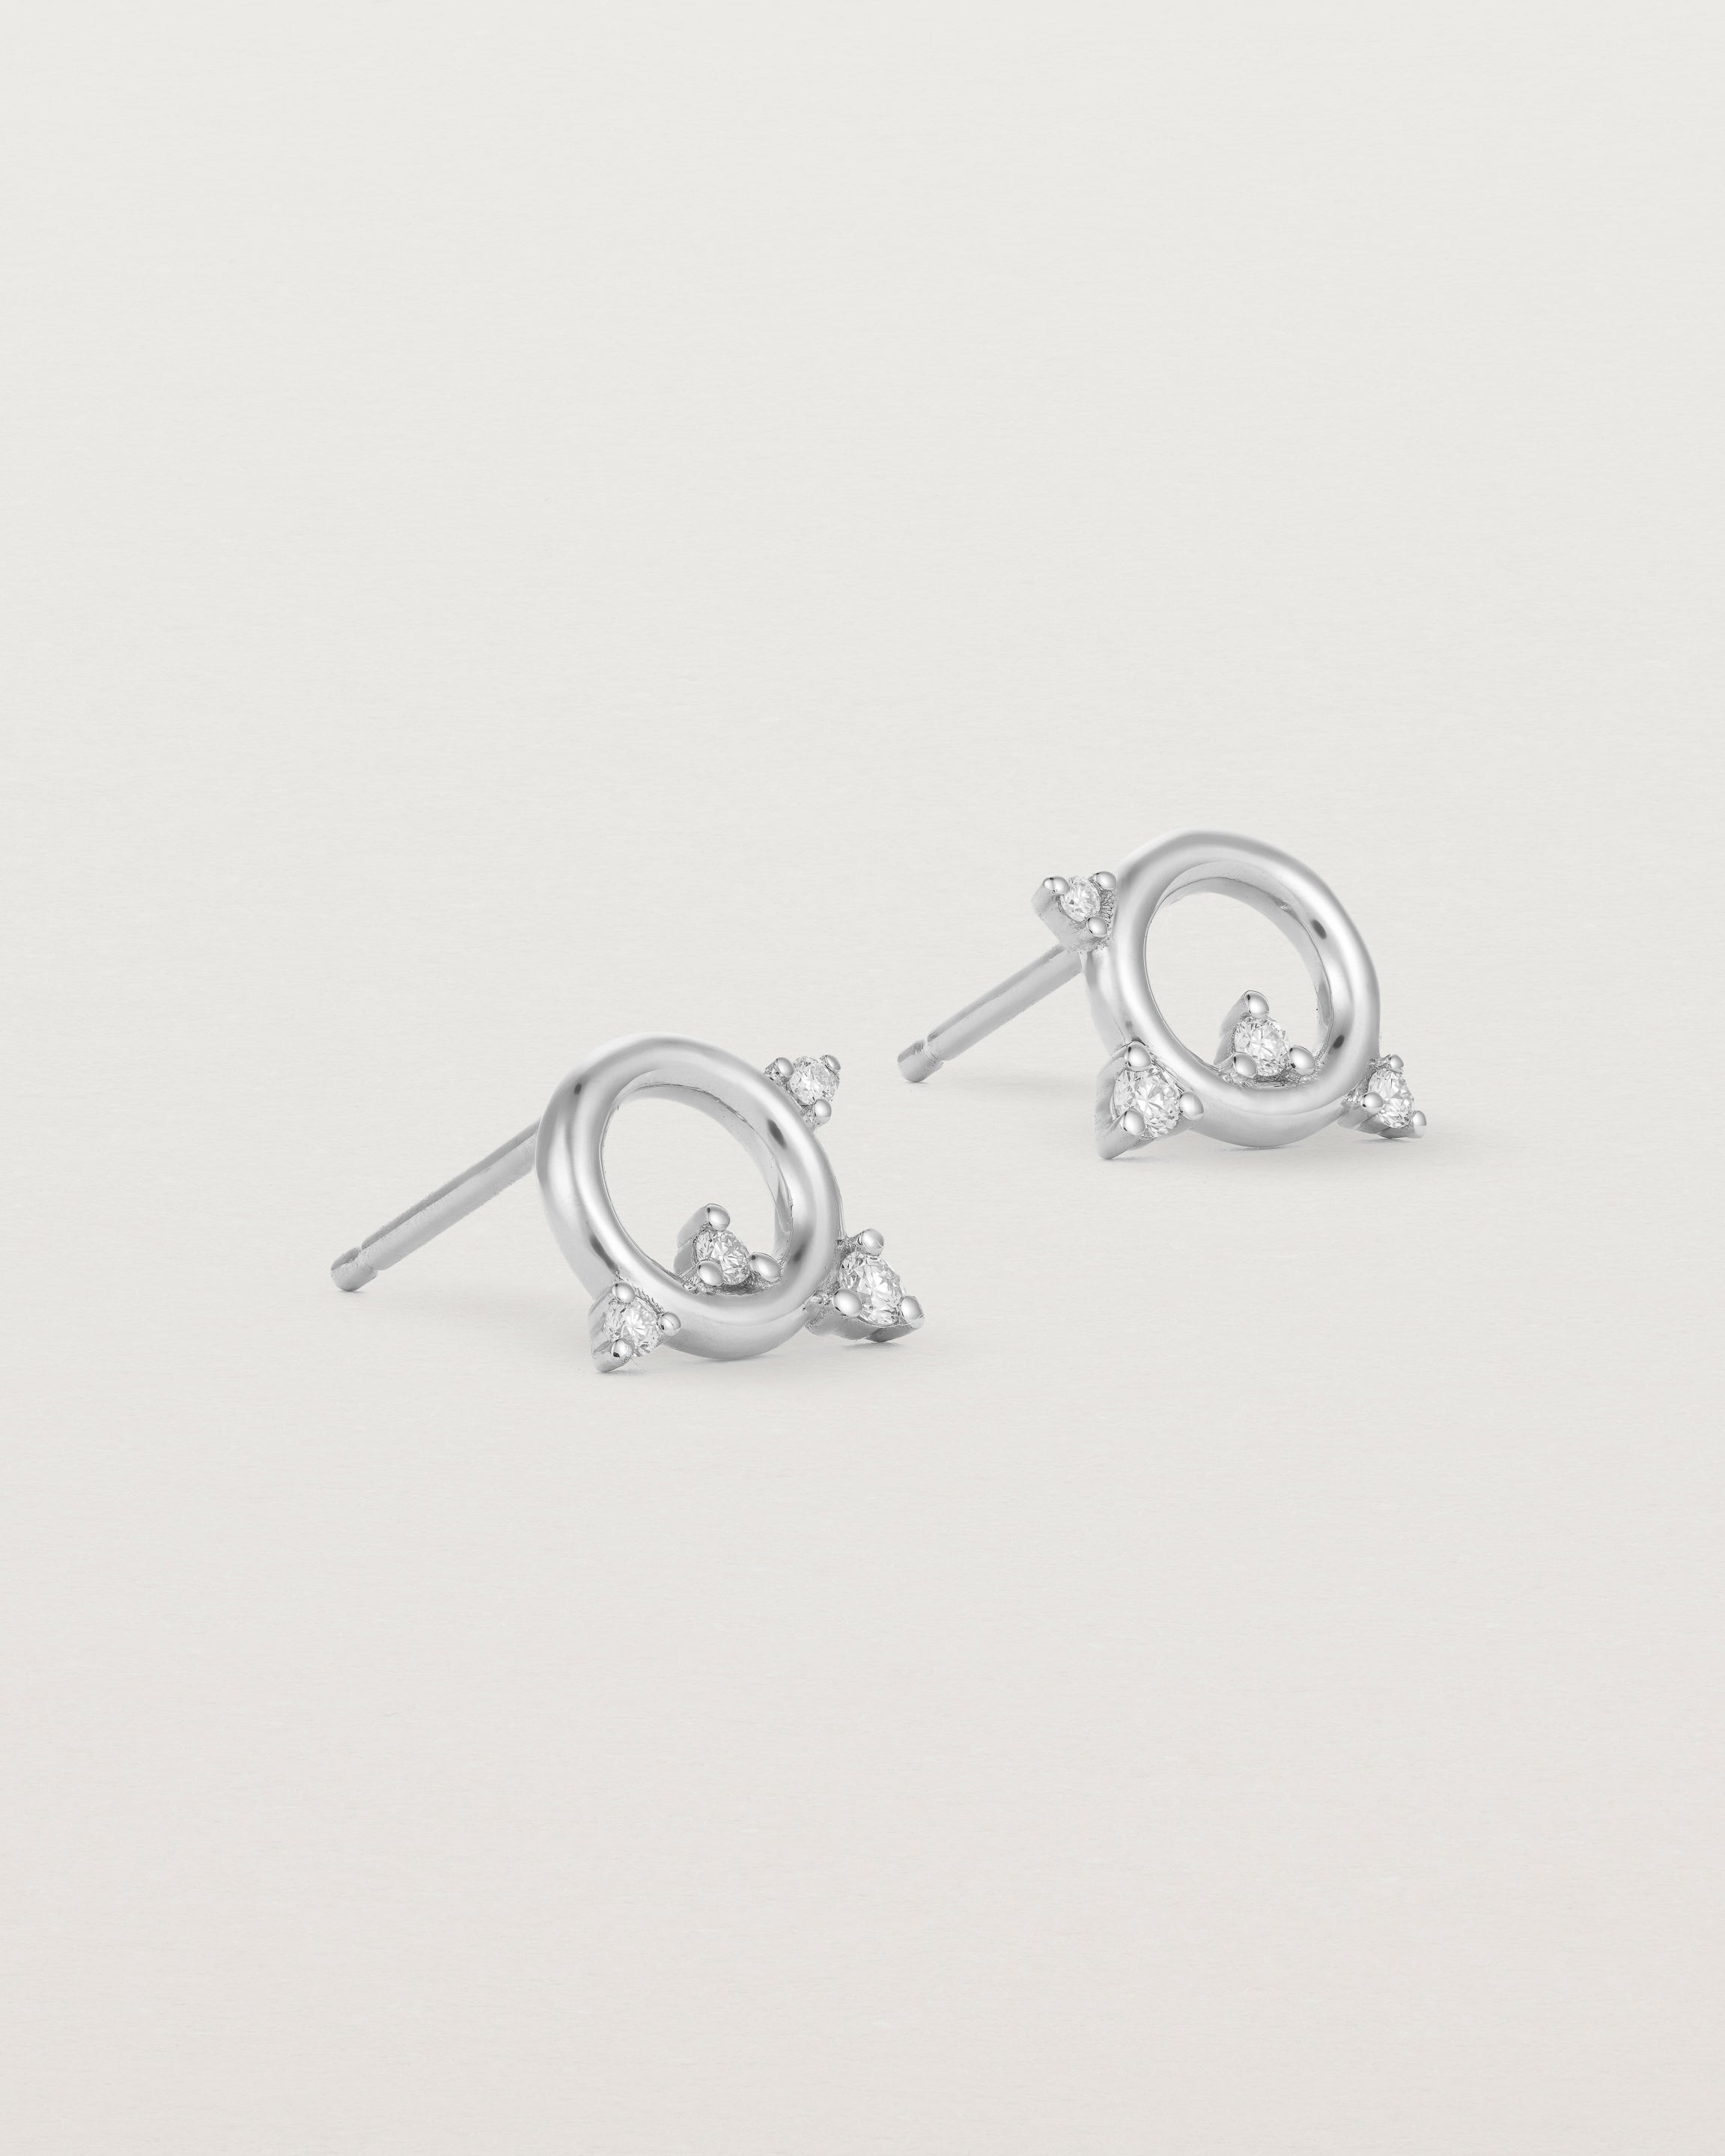 A pair of circular sterling silver studs with four white diamonds